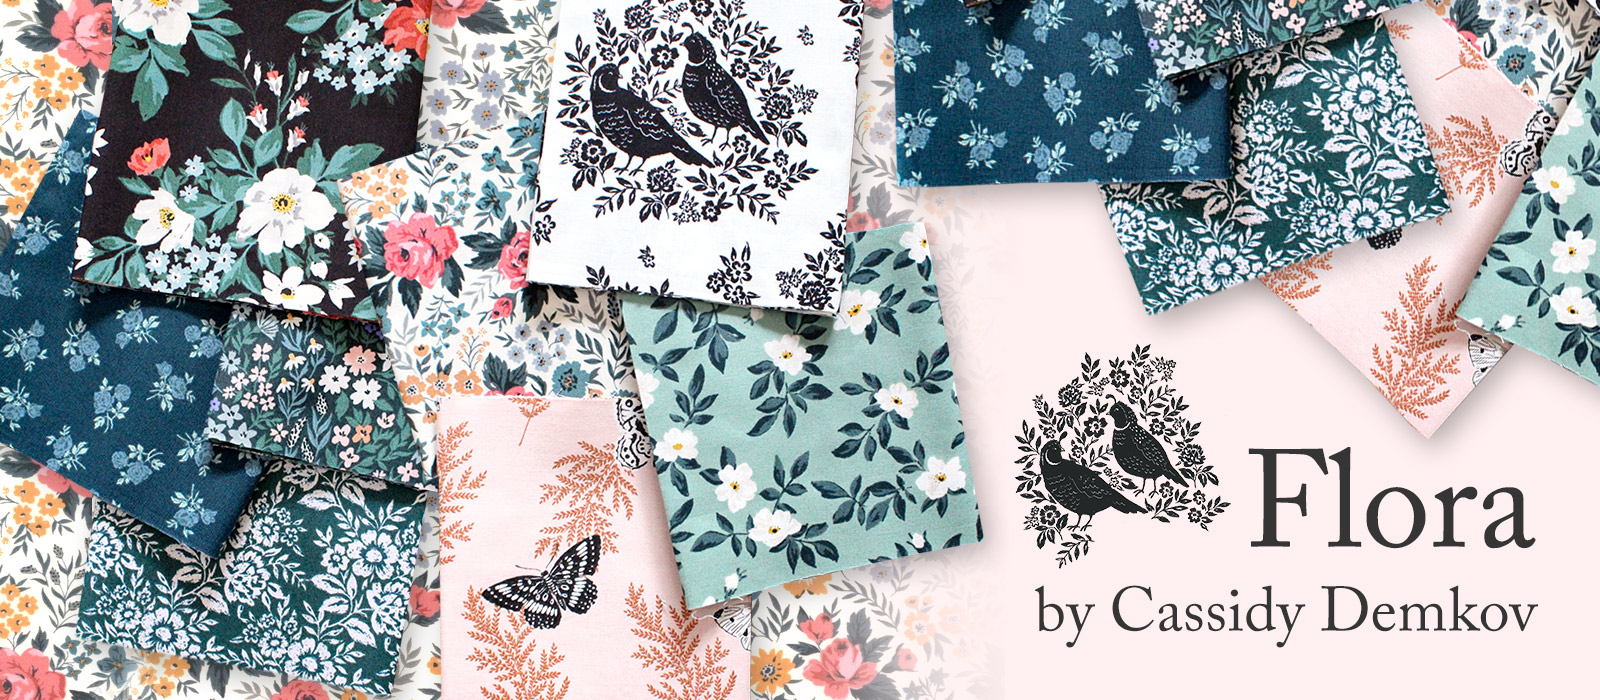 Cloud9 Fabrics Flora Collection by Cassidy Demkov